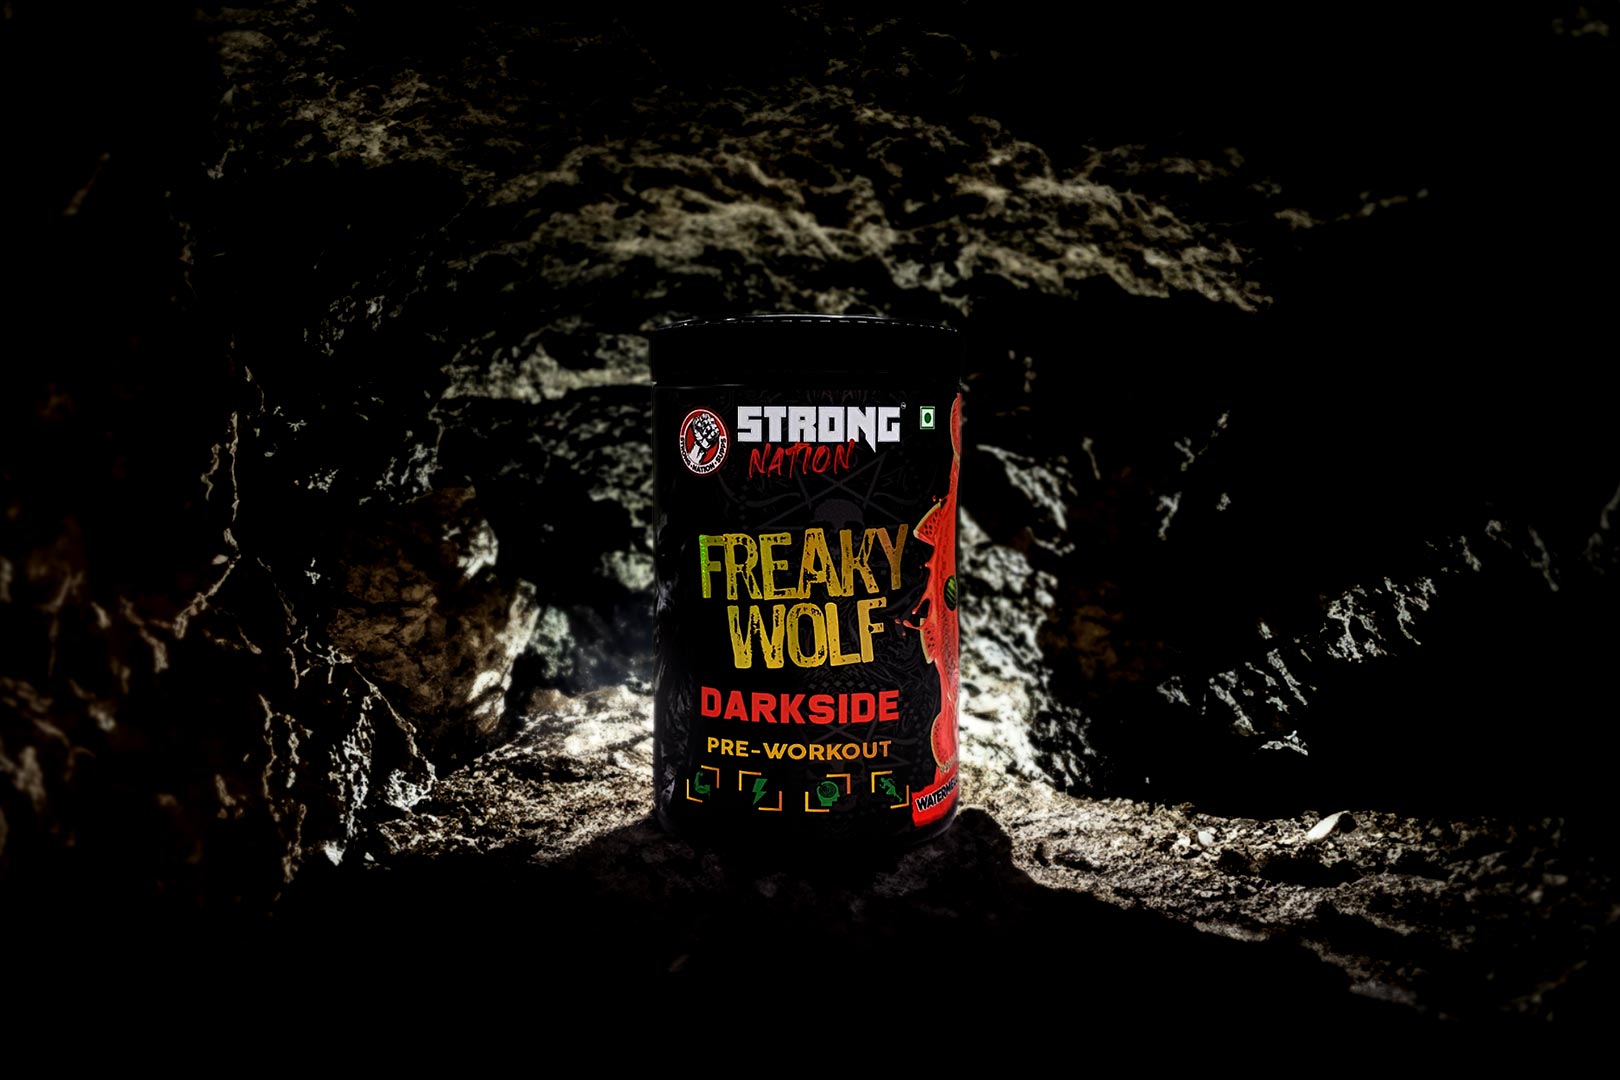 Strong Nation Freaky Wolf Darkside